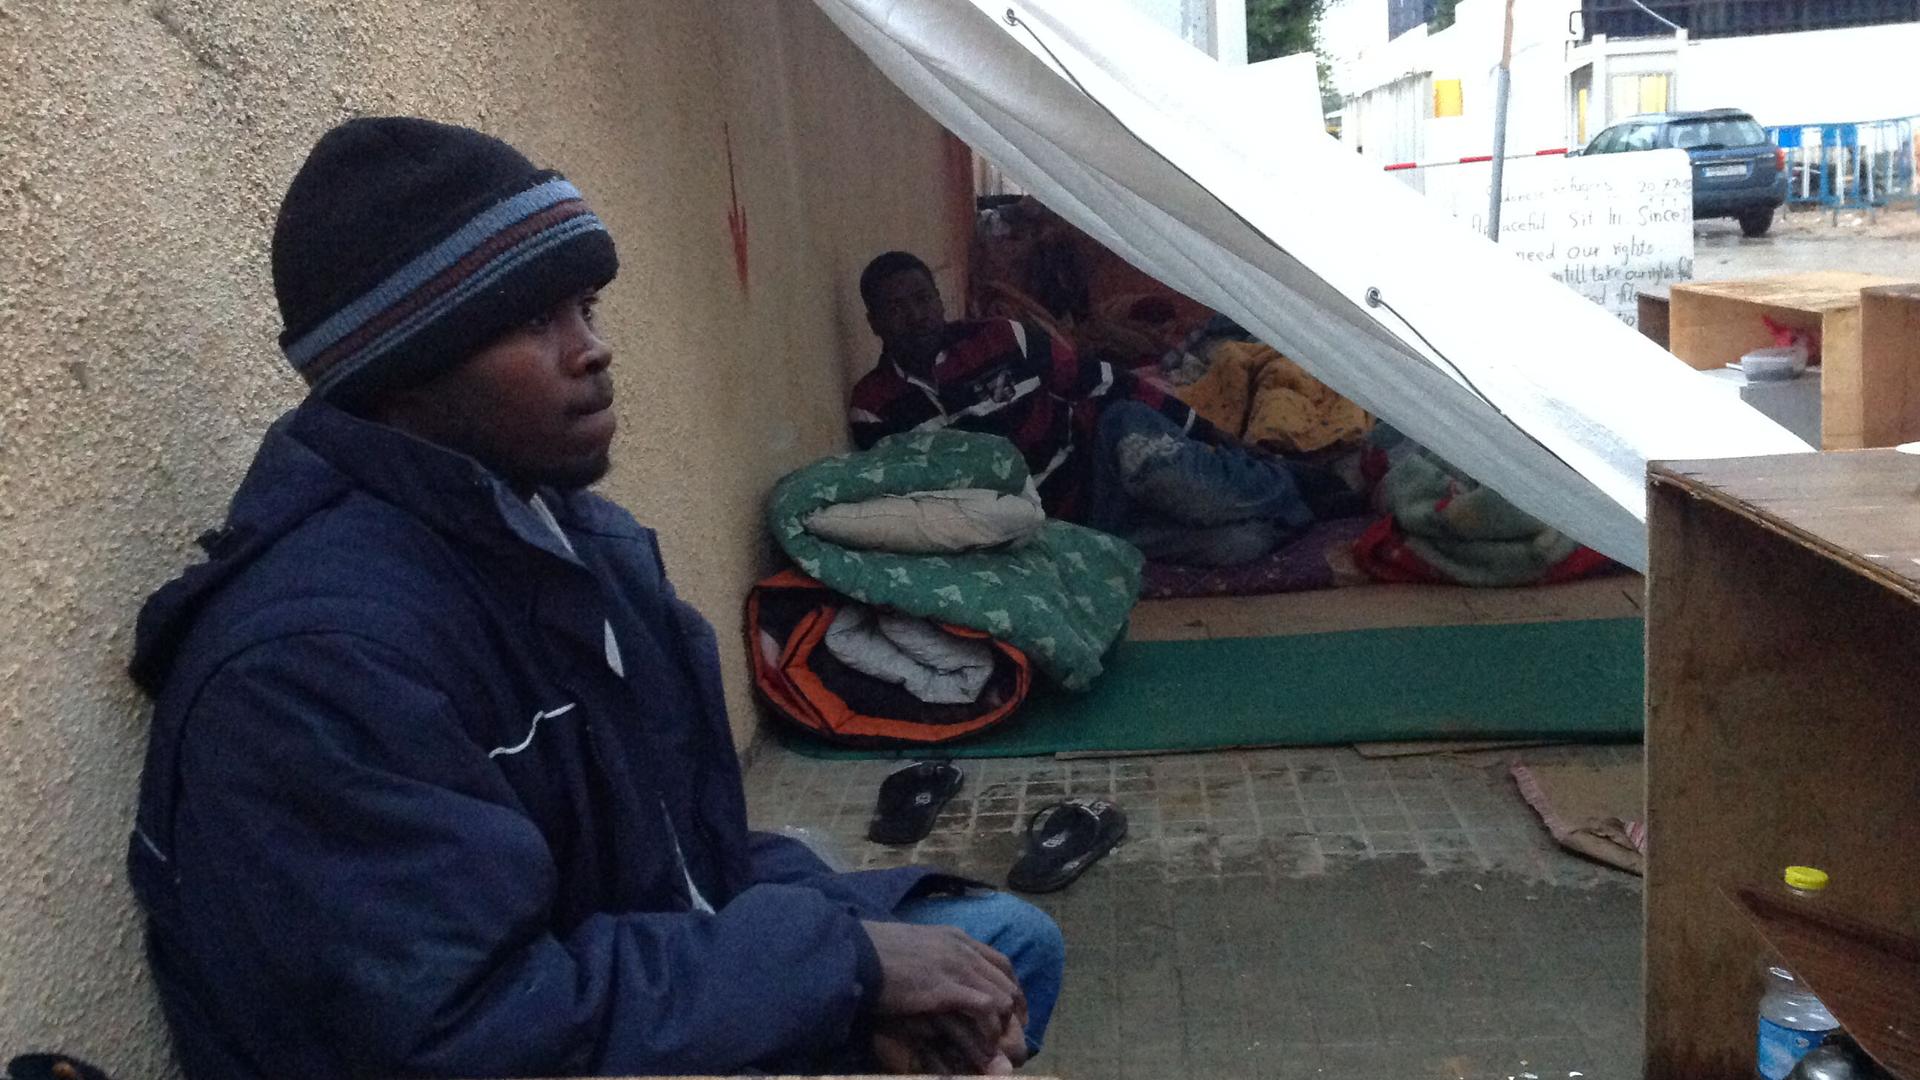 Abdallah Abu-Bakr Al-Ghazouli fled Darfur in 2007. He's tried to get refugee status in Lebanon since. Now he and some other Sudanese asylum seekers are camping out 100 feet from the UNHCR office in Beirut.